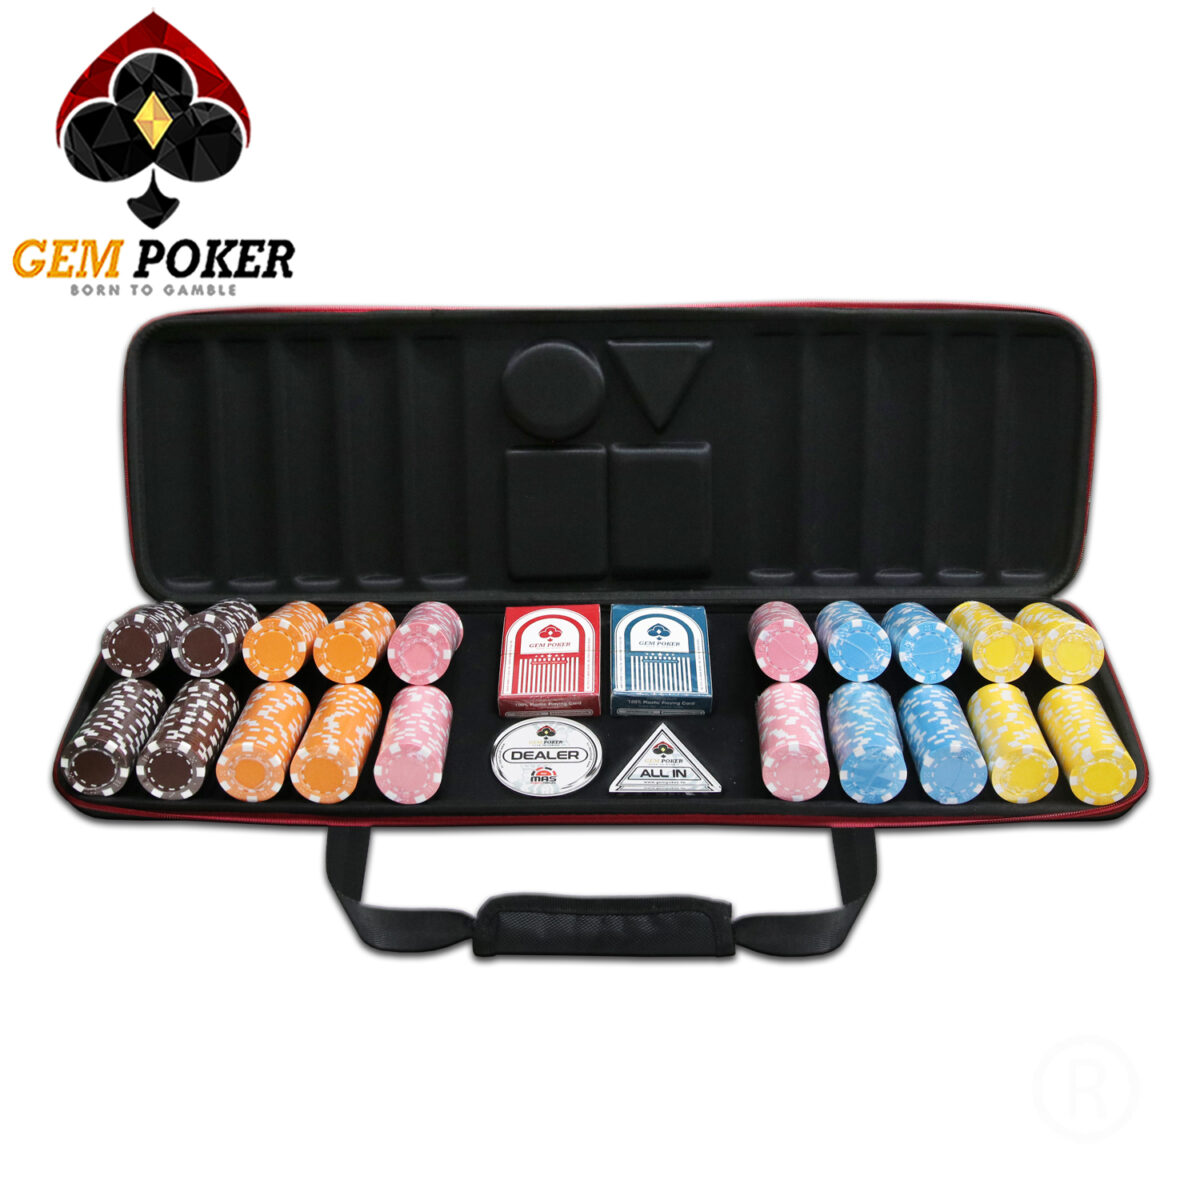 TRAVEL SET 500 ABS POKER CHIPS 5 COLORS